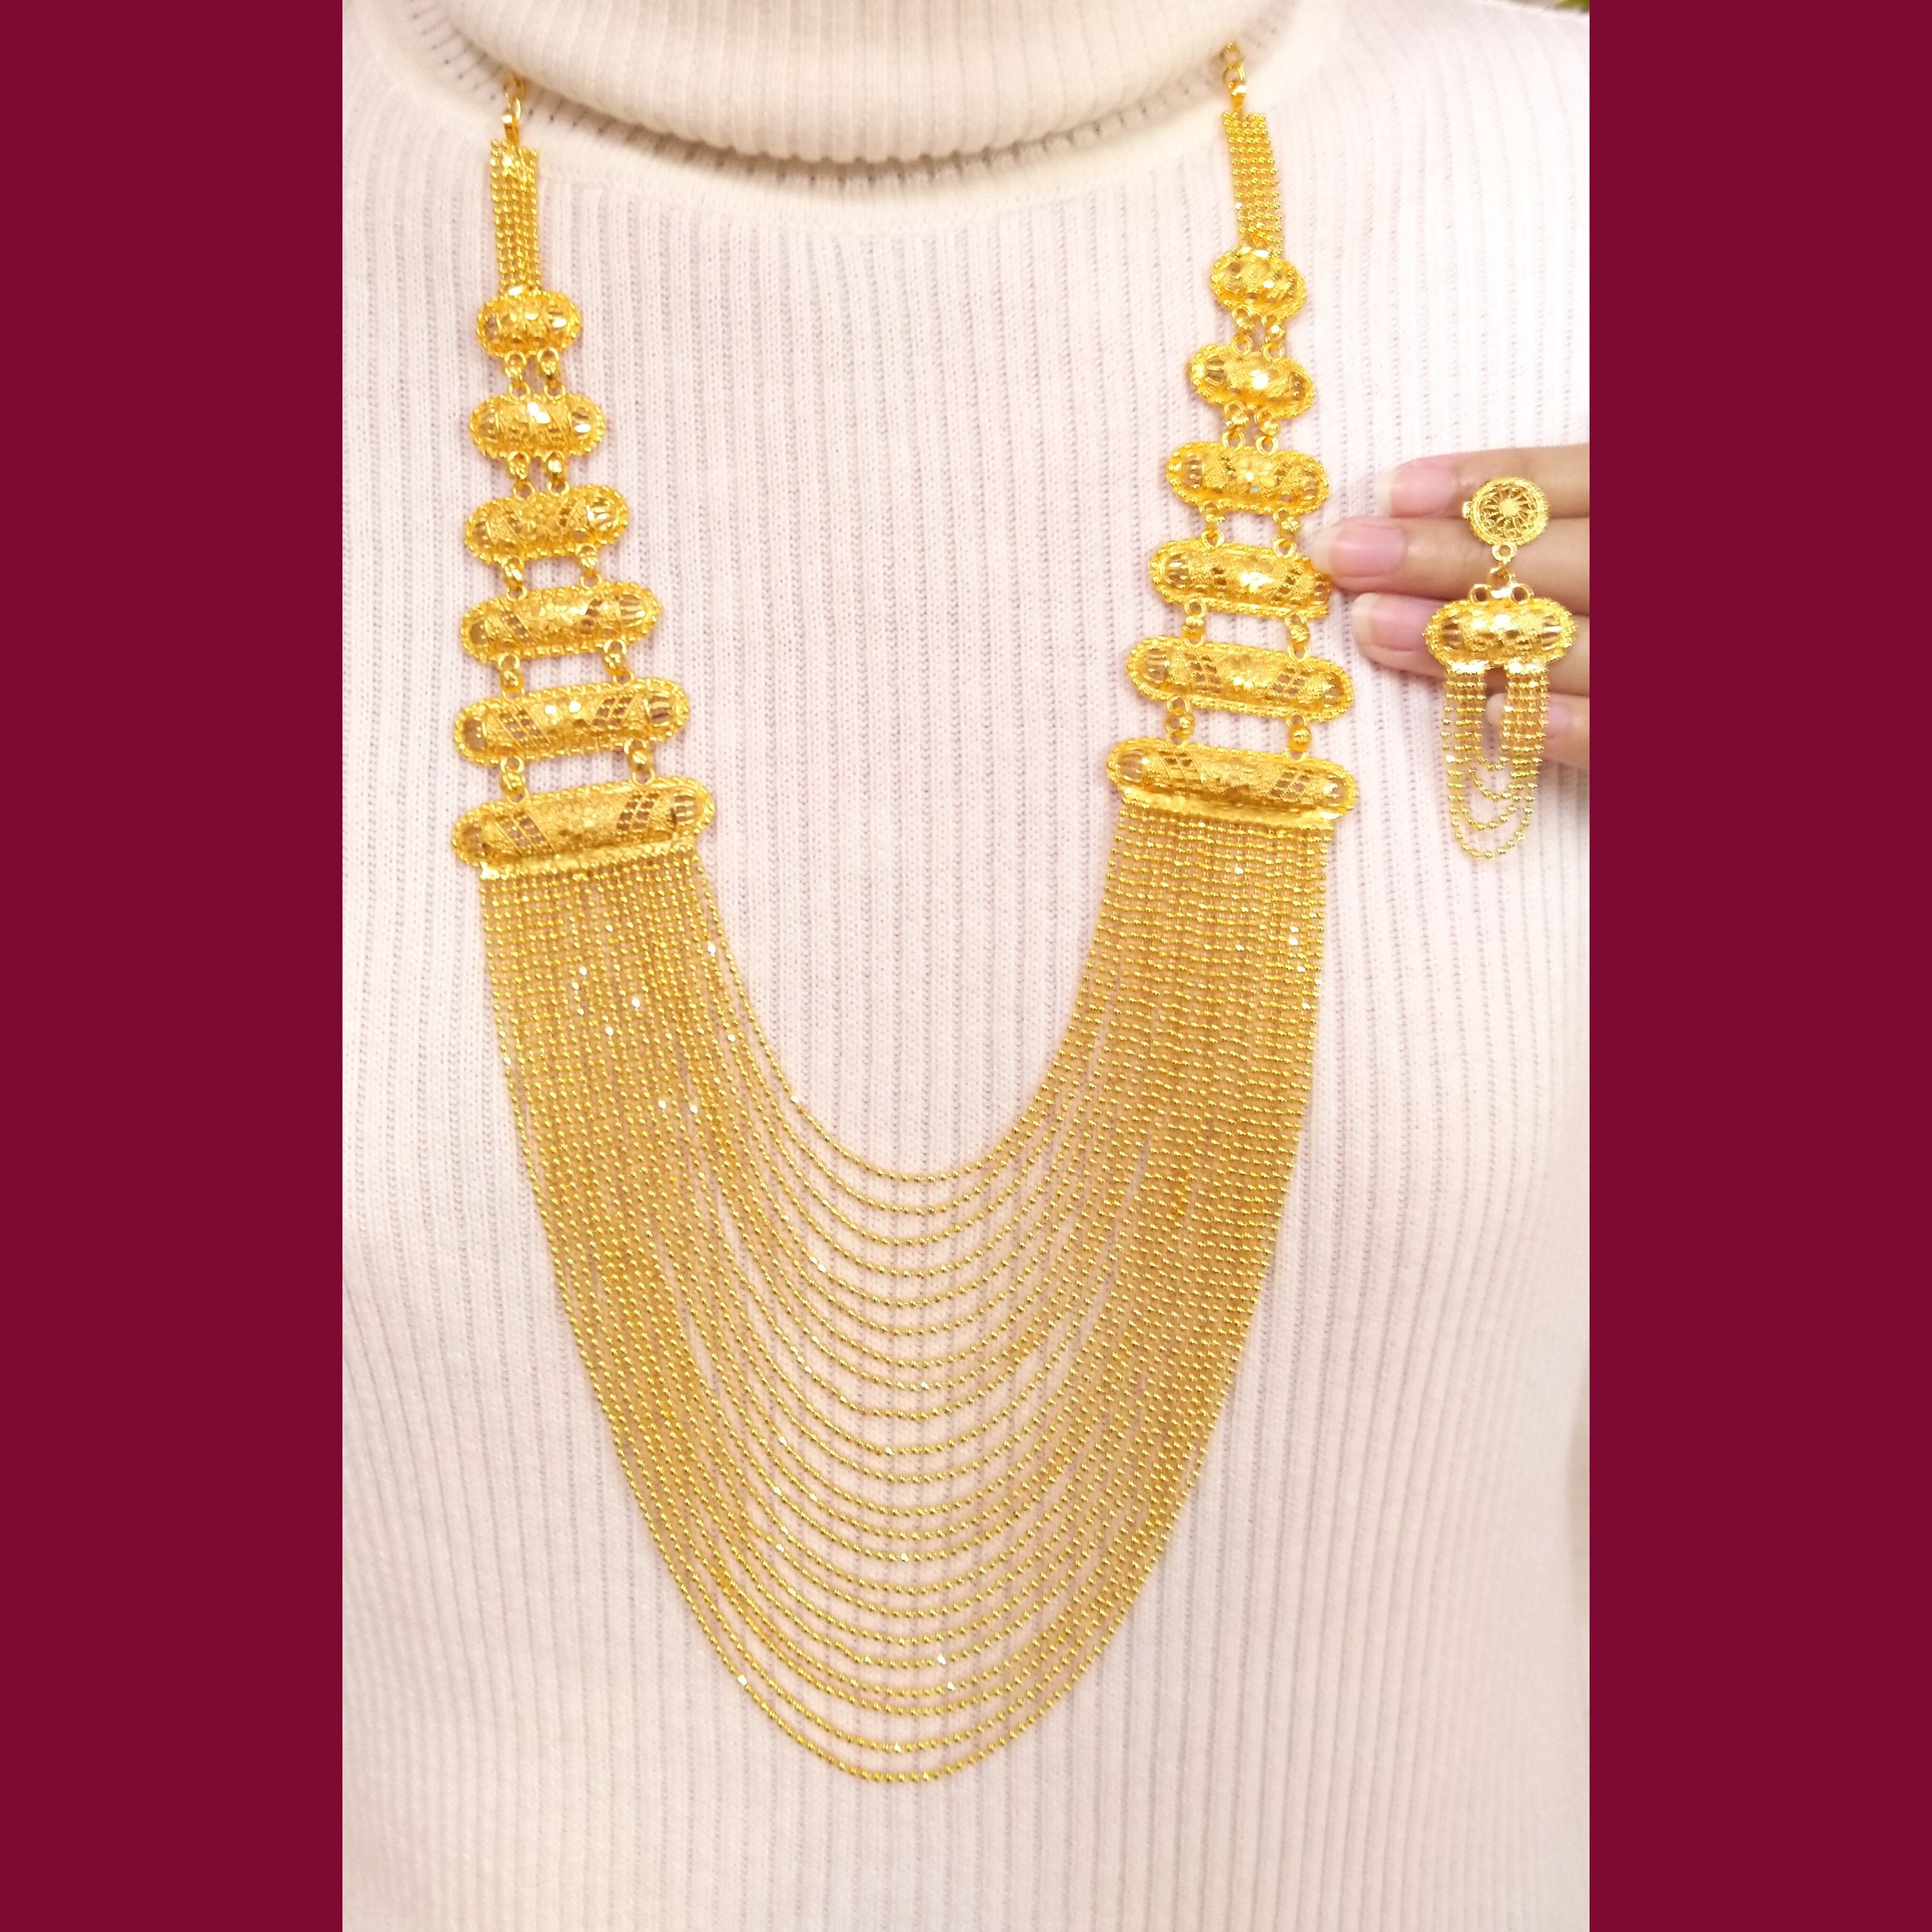 Beautiful necklace with 18 carat yellow gold, 1 mm thick, 45 cm